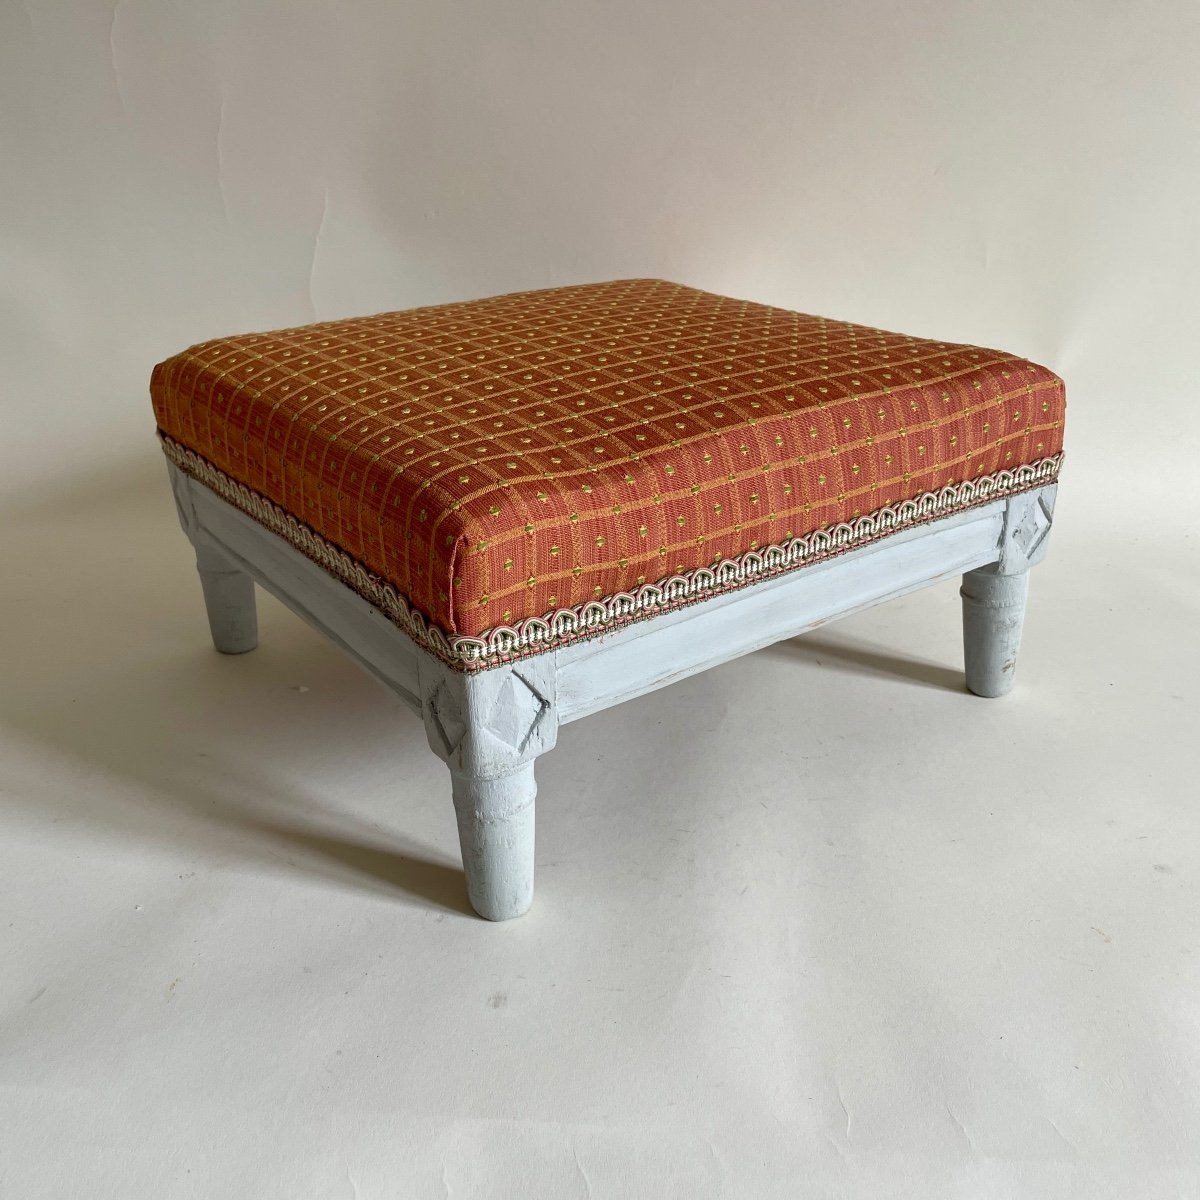 Footrest Stool In Lacquered Wood From The Directoire Period Late 18th Century - Early 19th Century